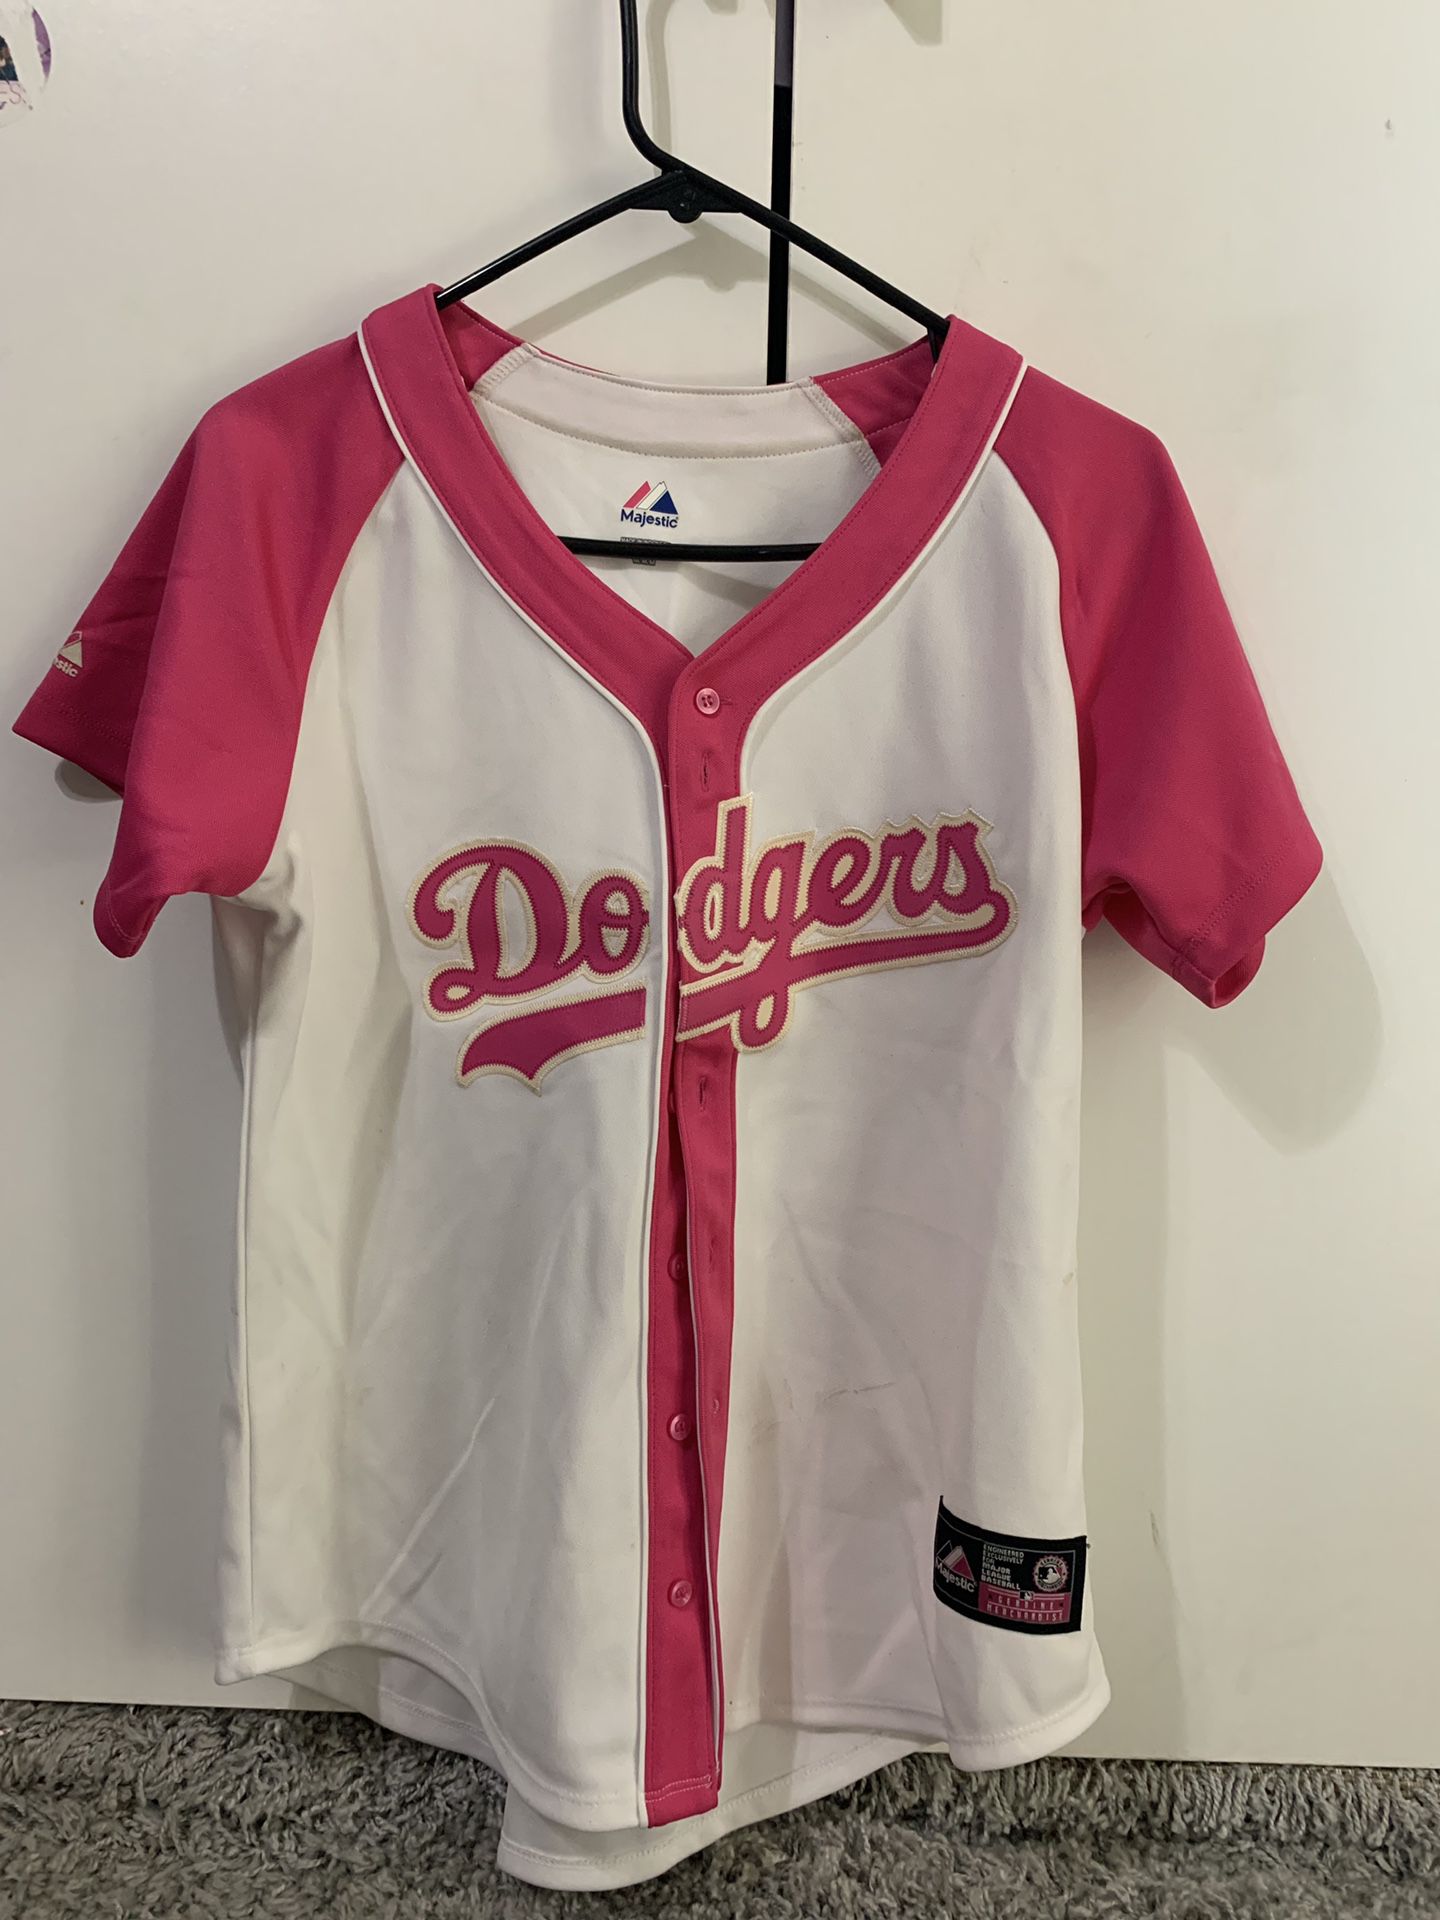 PINK Dodgers Jersey for Sale in Fountain Valley, CA - OfferUp